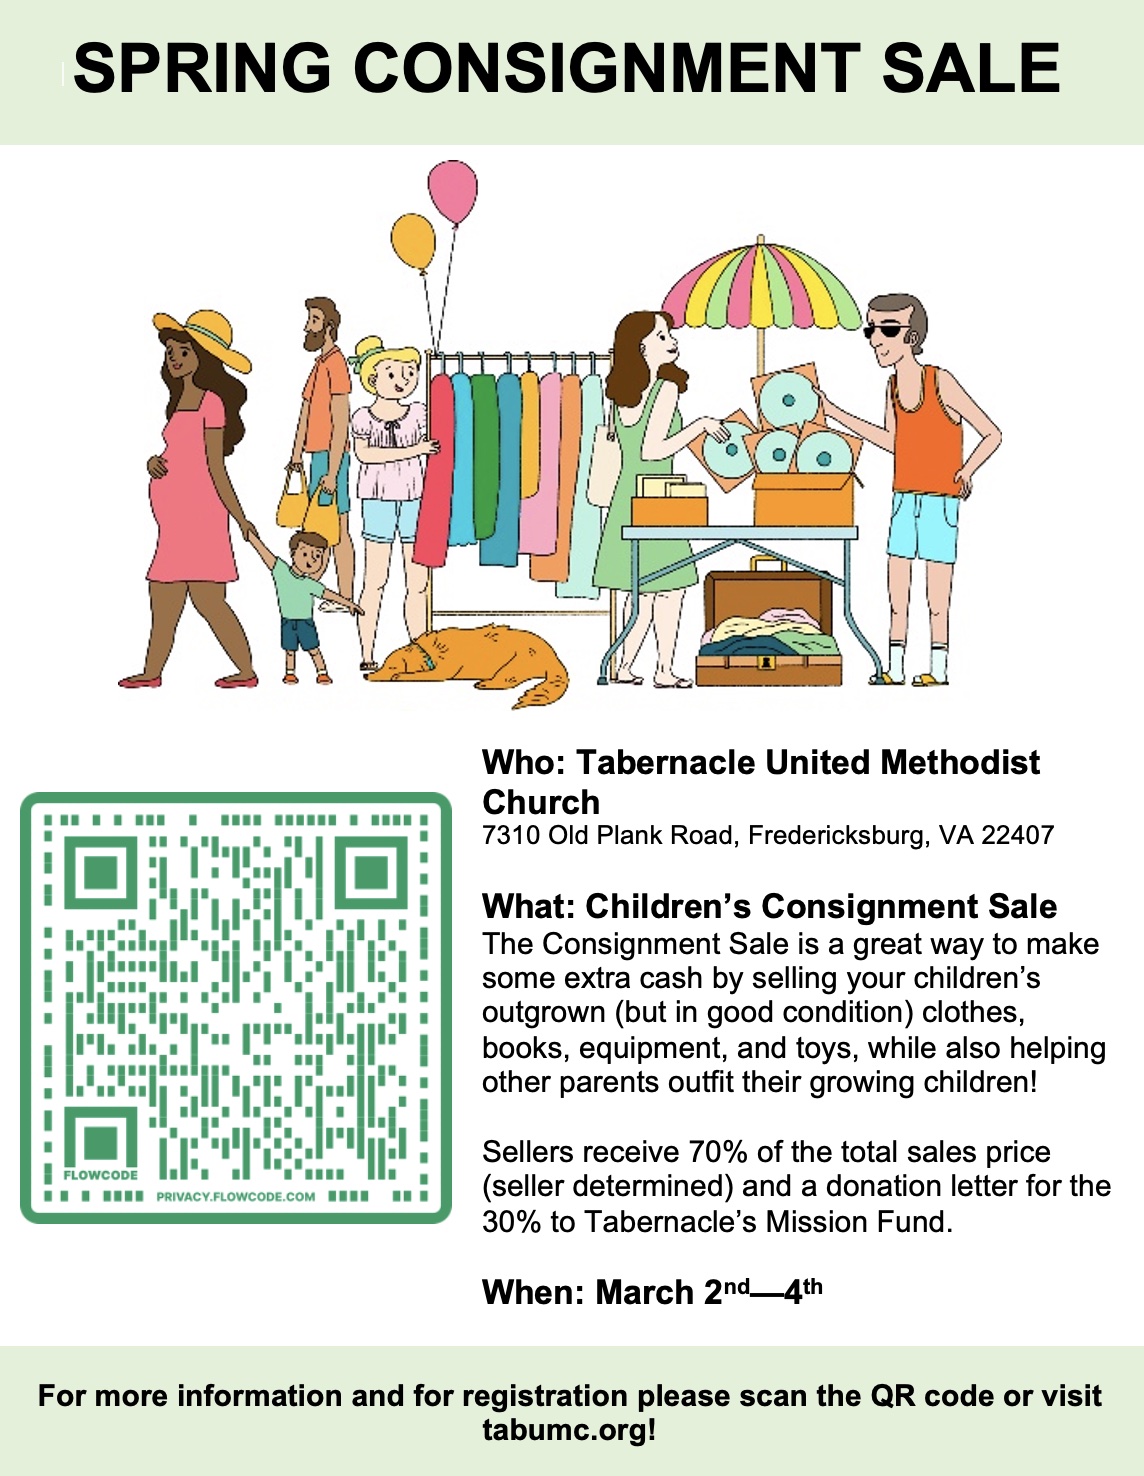 <h1 class="tribe-events-single-event-title">Children’s Consignment Sale</h1>